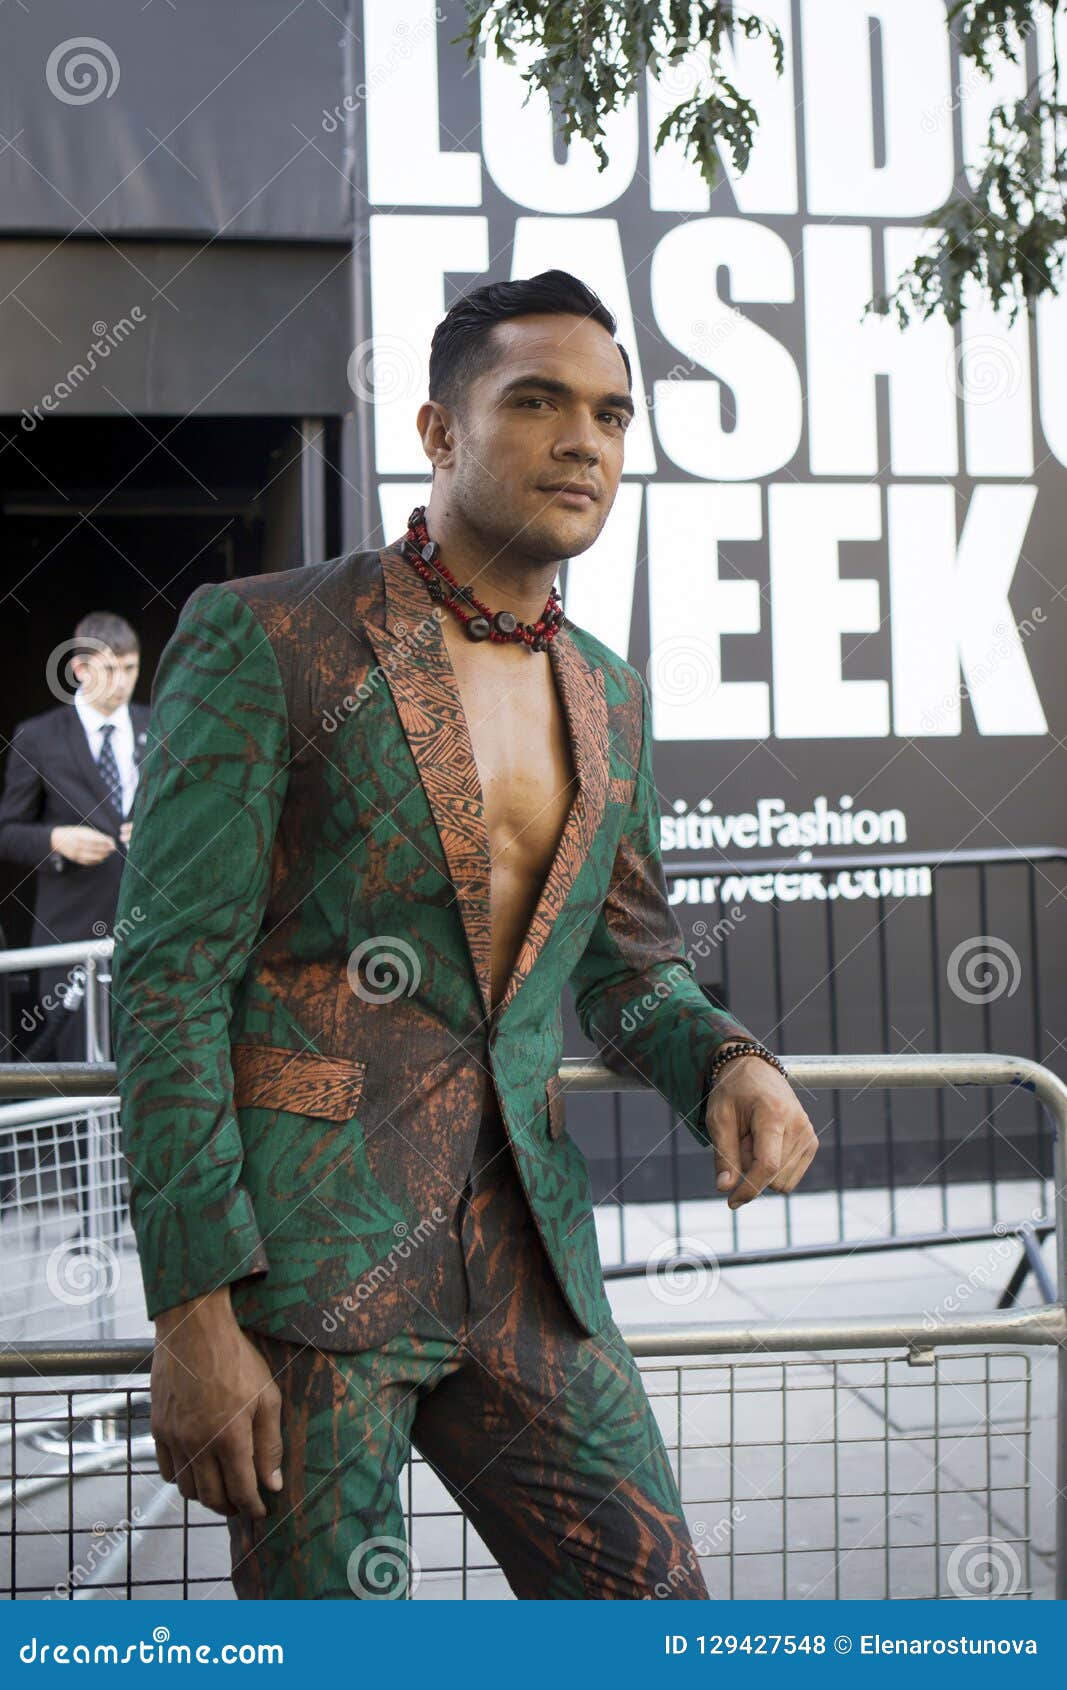 A Man In A Green Suit With Flowers From 